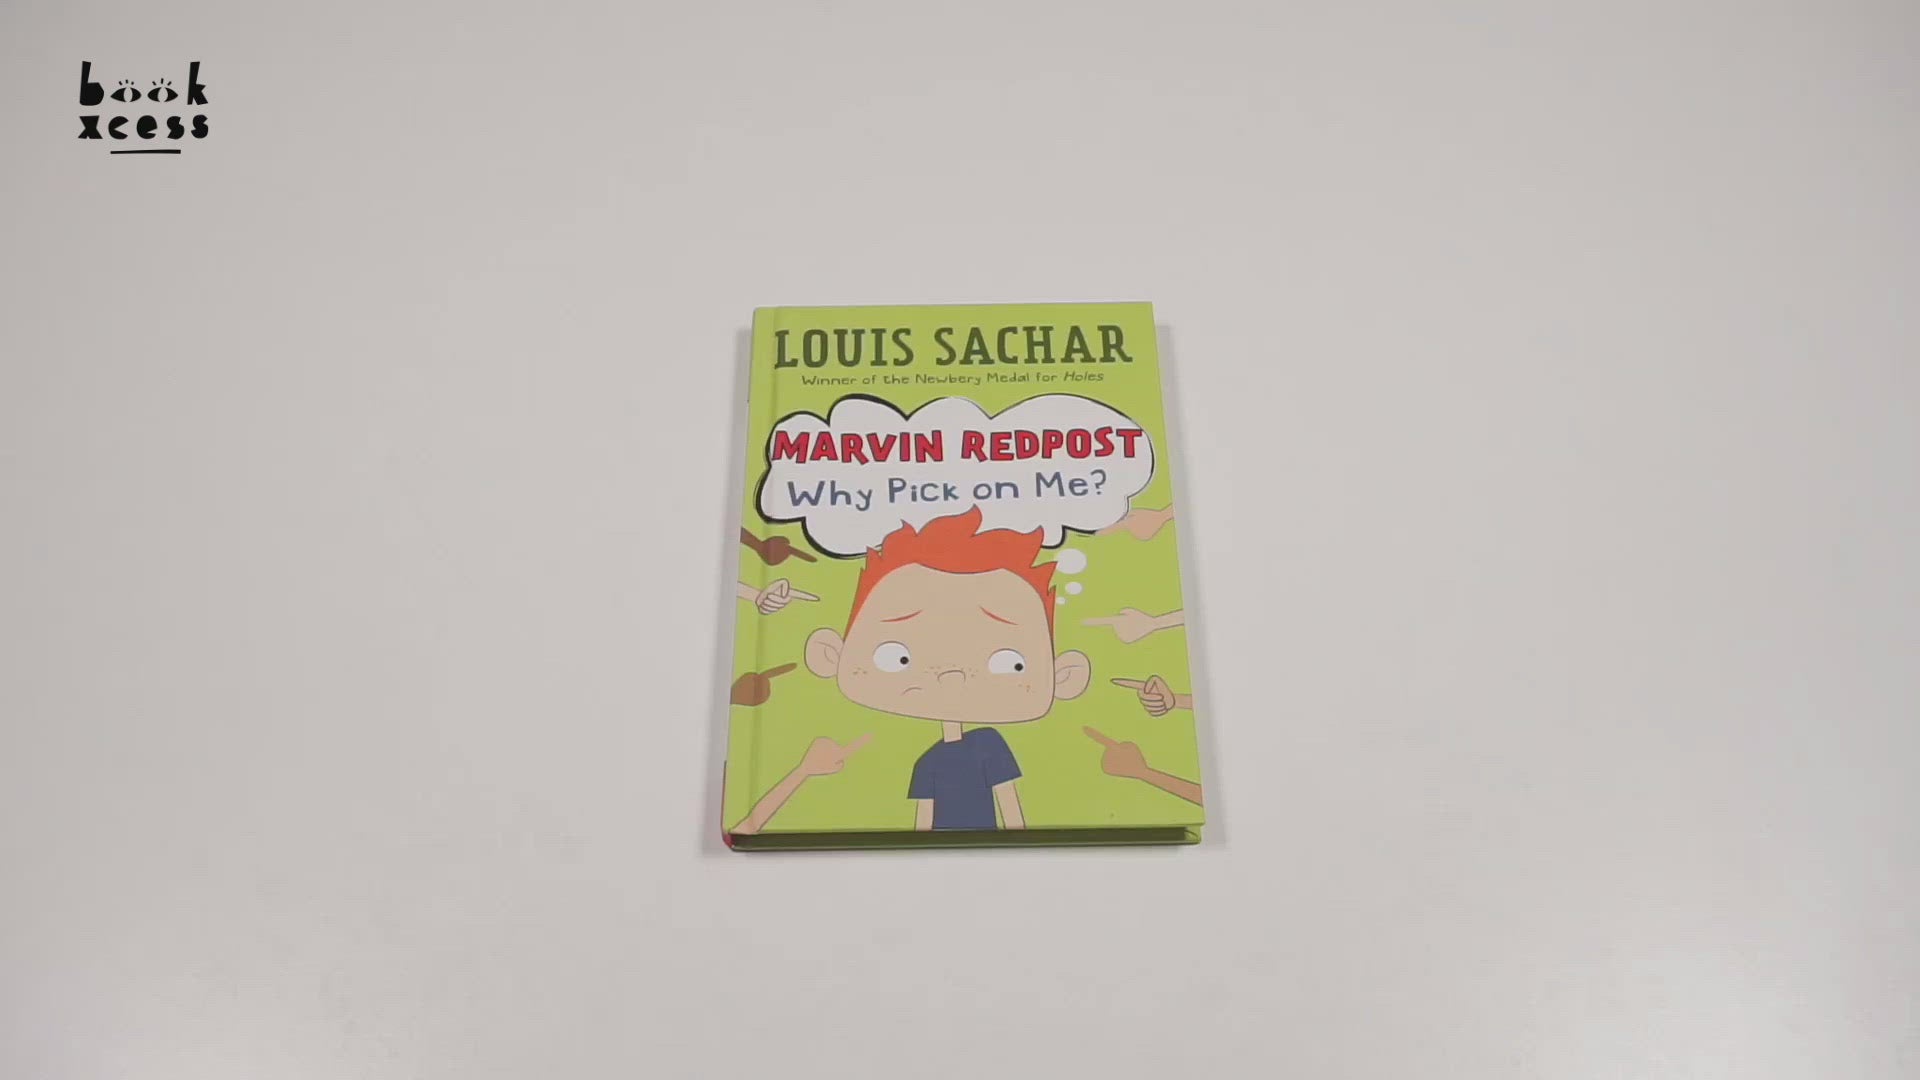 Marvin Redpost: Why Pick on Me? eBook by Louis Sachar - EPUB Book